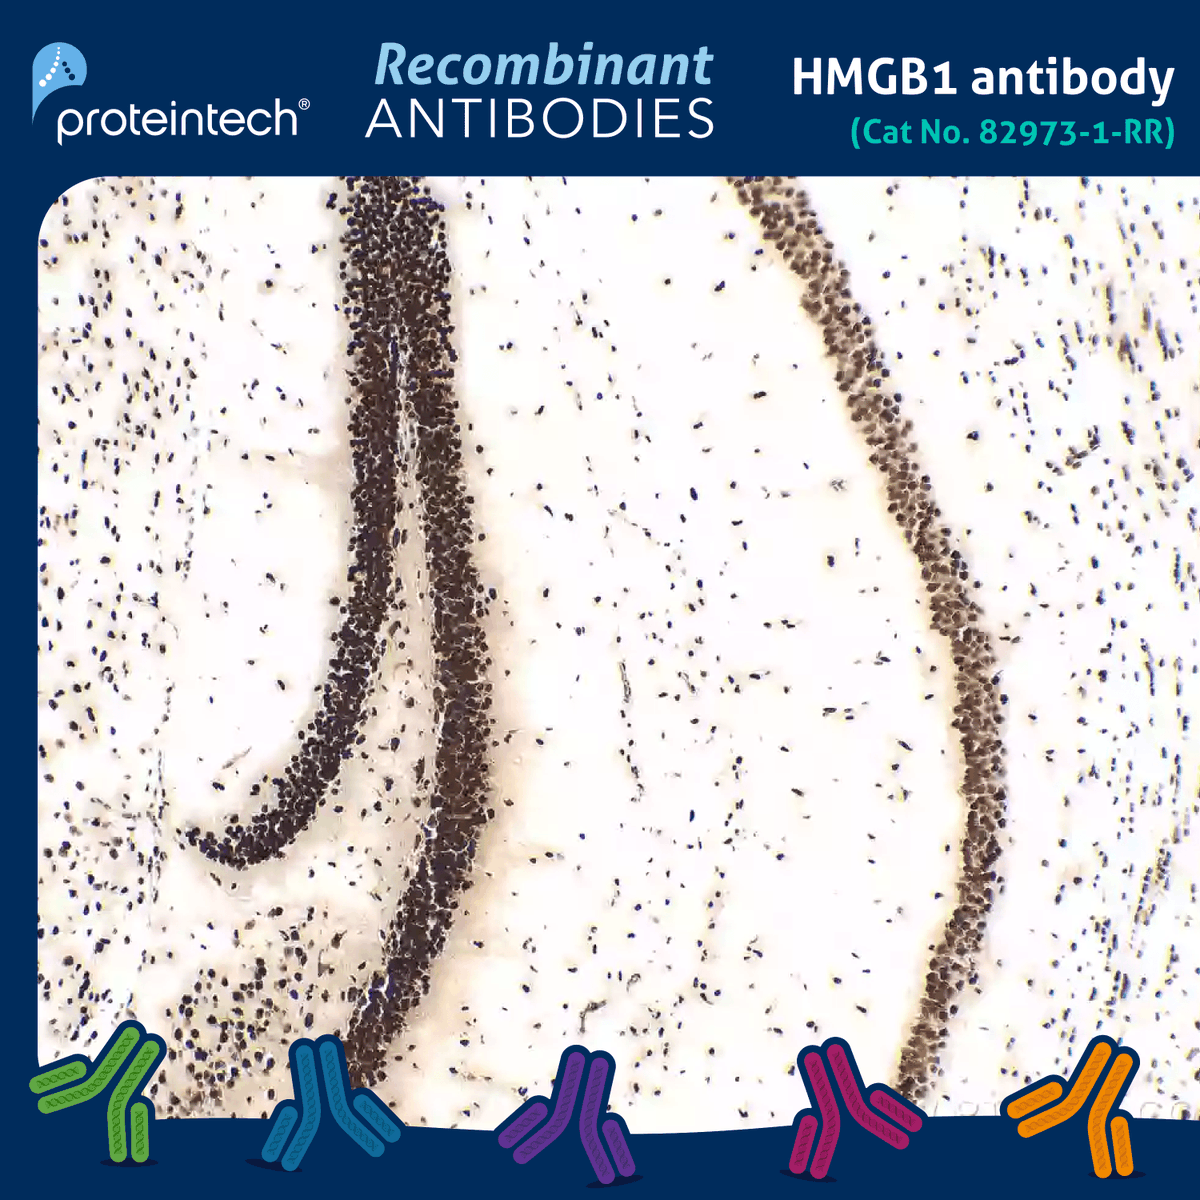 Is HMGB1 playing a role in your disease model? Find out using our new recombinant HMGB1 antibody validated in WB, ELISA, IF, and IHC. All our recombinant antibodies come with high lot-to-lot consistency leading to high data reproducibility. Learn more: ow.ly/3t1850RoaJ1